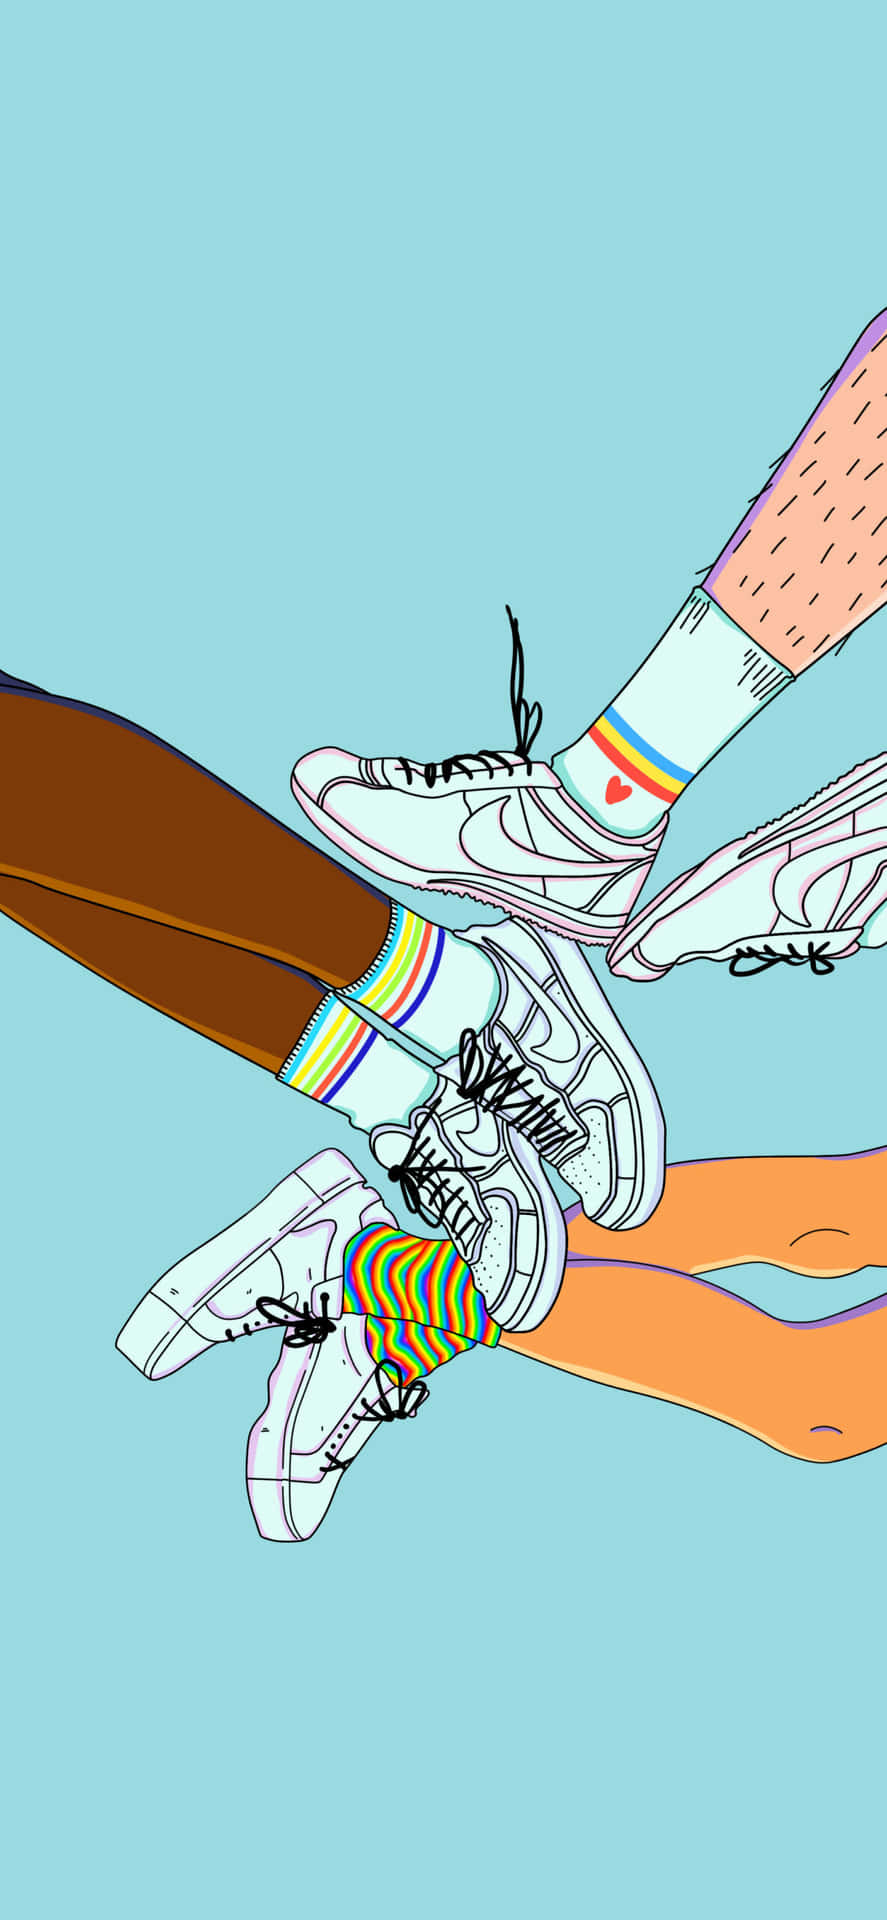 Image A Sneakerhead Styled Out in their Best Footwear Wallpaper